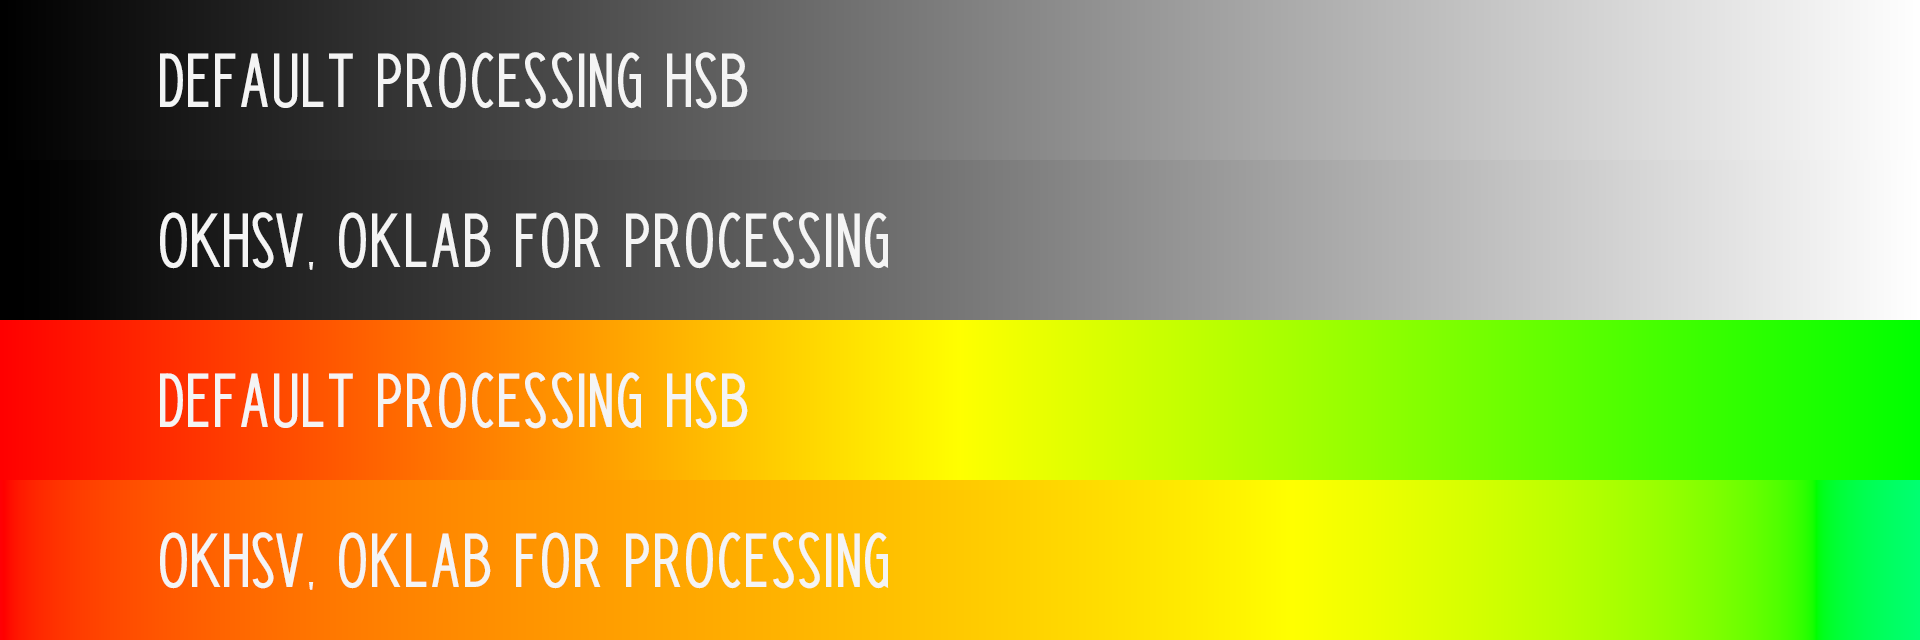 Comparison of smooth gradients as generated by Processing's default color functions versus Oklab-for-Processing's color functions.